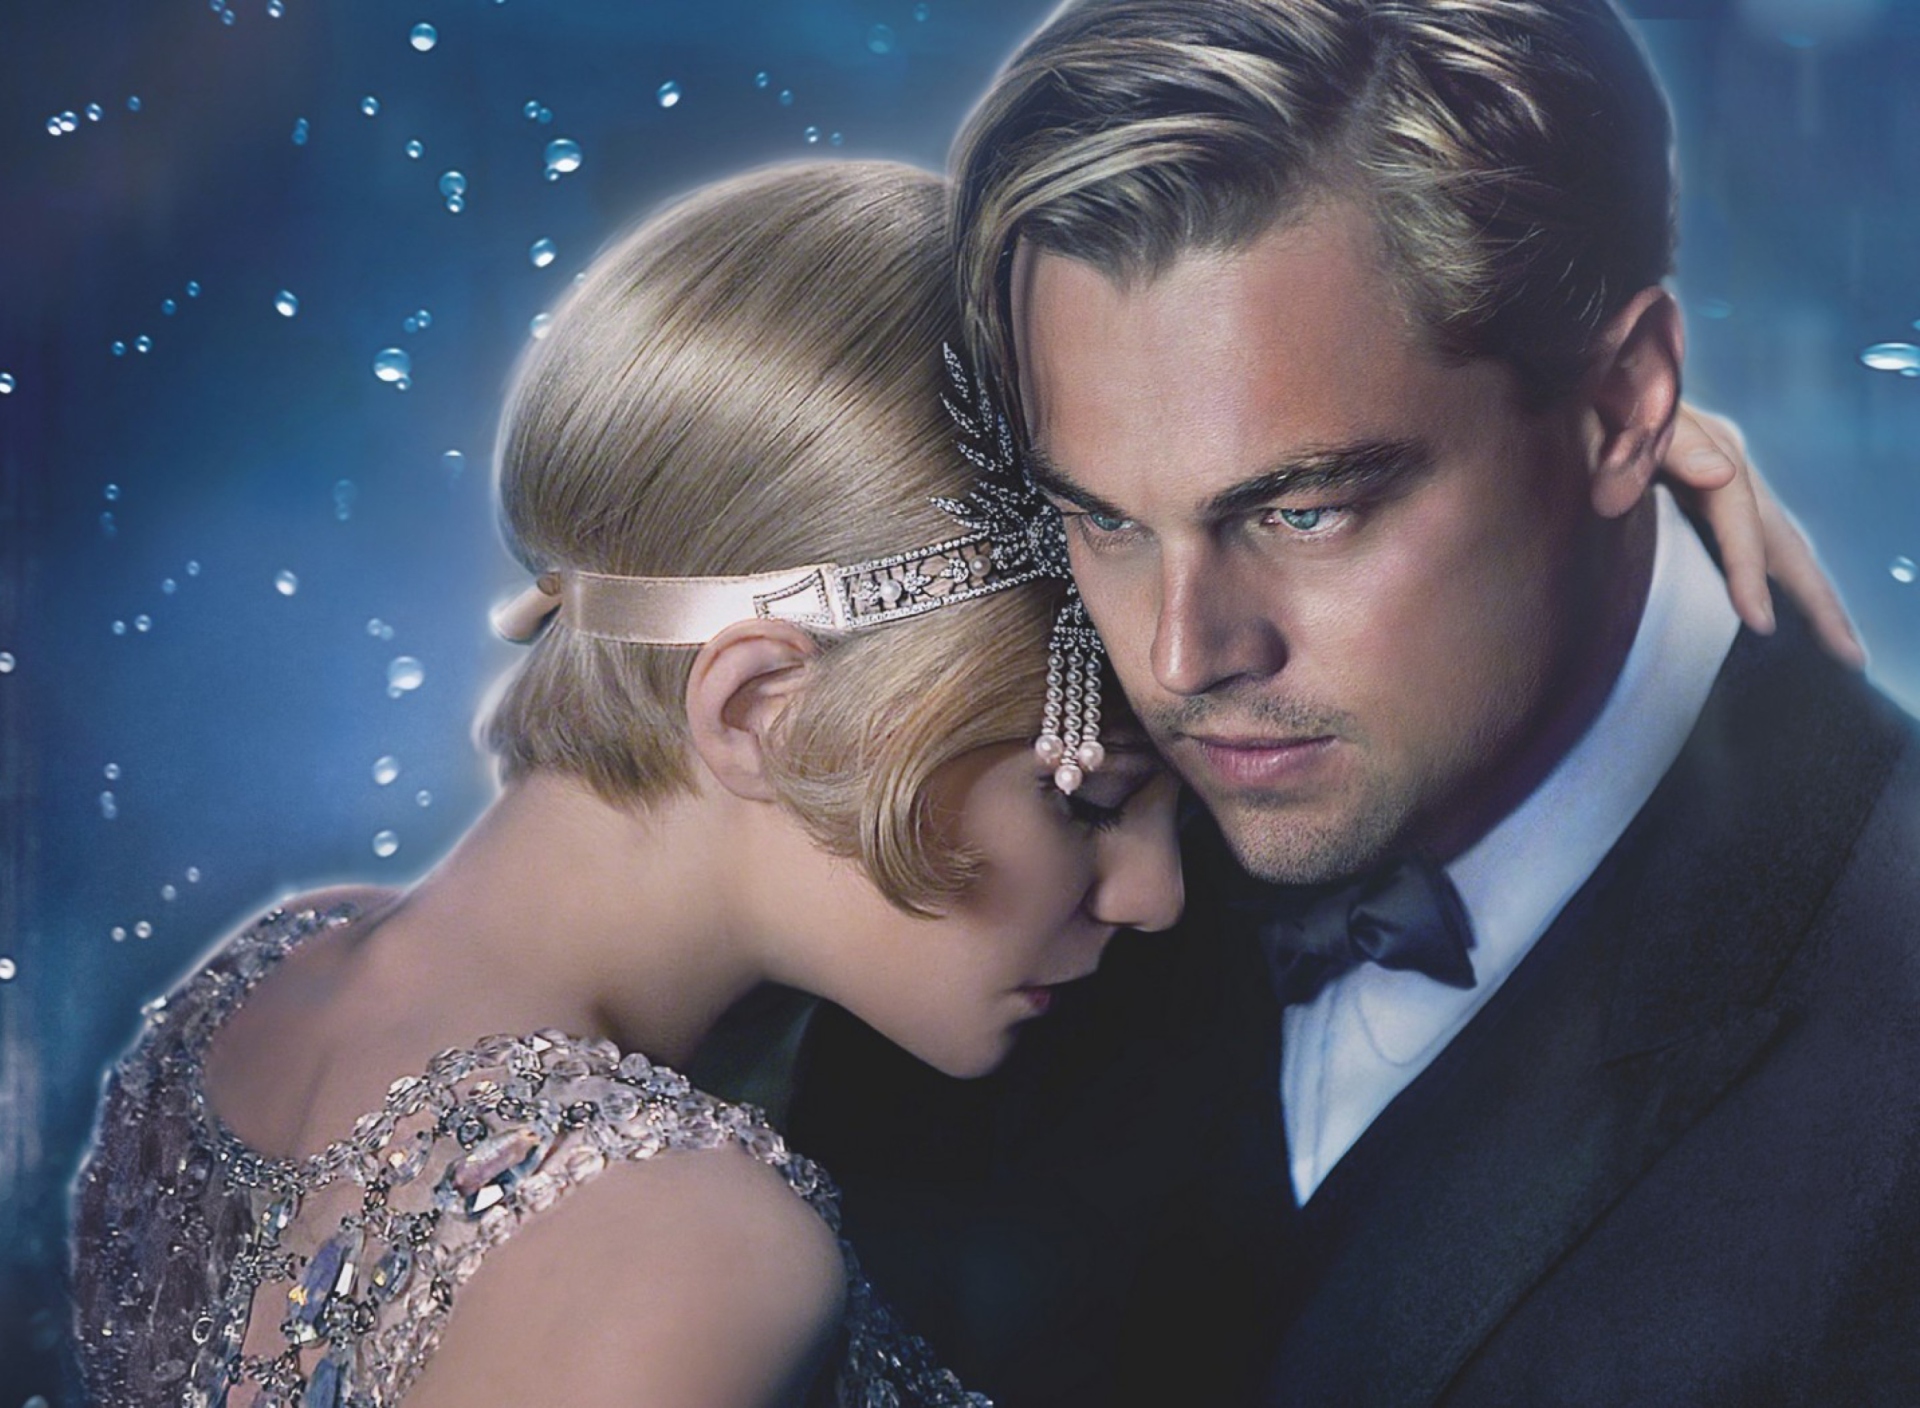 The Great Gatsby wallpaper 1920x1408